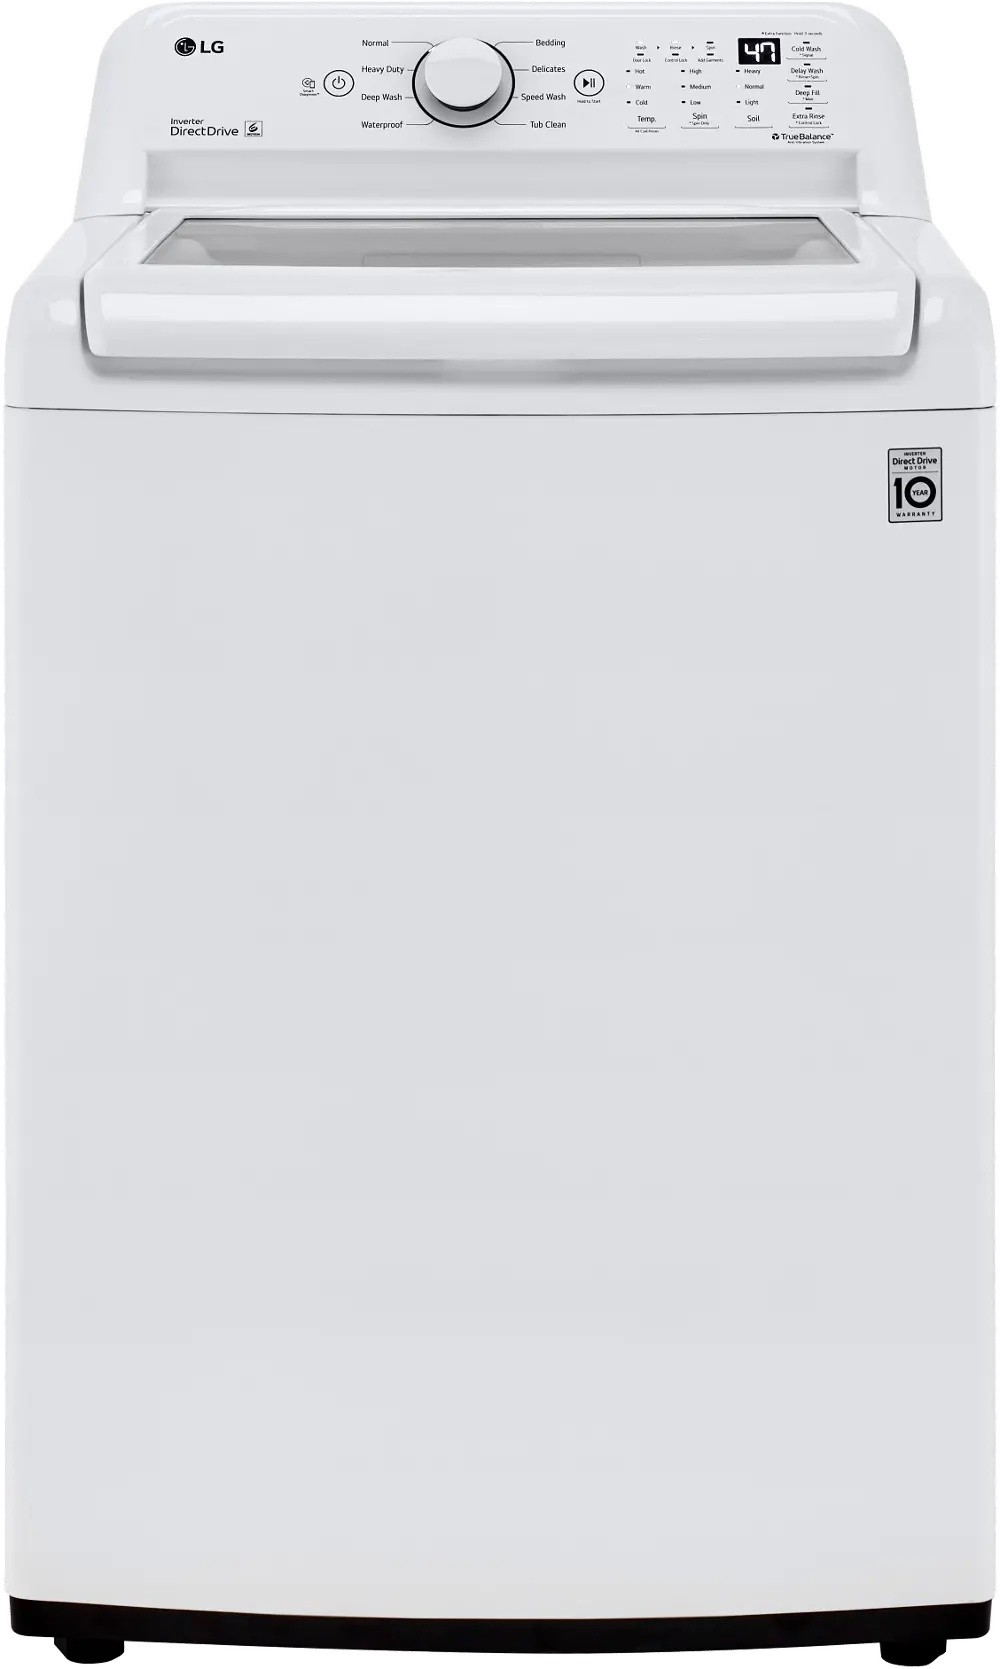 WT7005CW LG 4.3 cu. ft. Mega Capacity Top Load Washer with 4-Way Agitator & TurboDrum Technology - 4.3 cu. ft. White-1